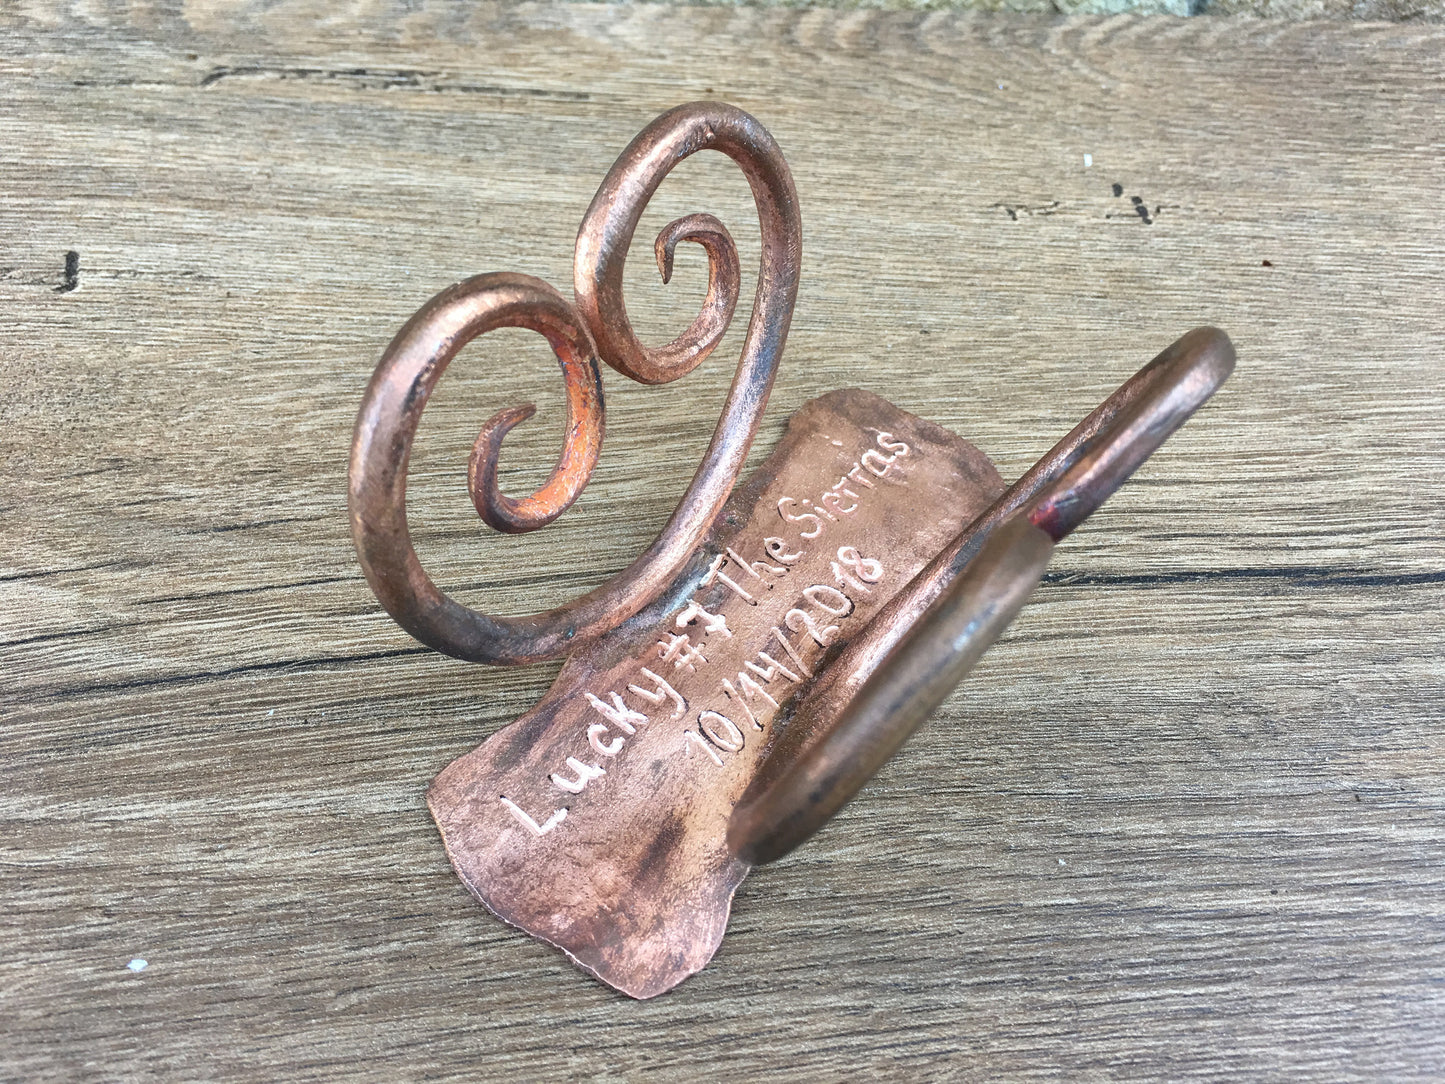 7th anniversary gift, copper gifts, 7 year gifts, copper horseshoe, copper heart, copper anniversary,copper wedding,engagement,love talisman